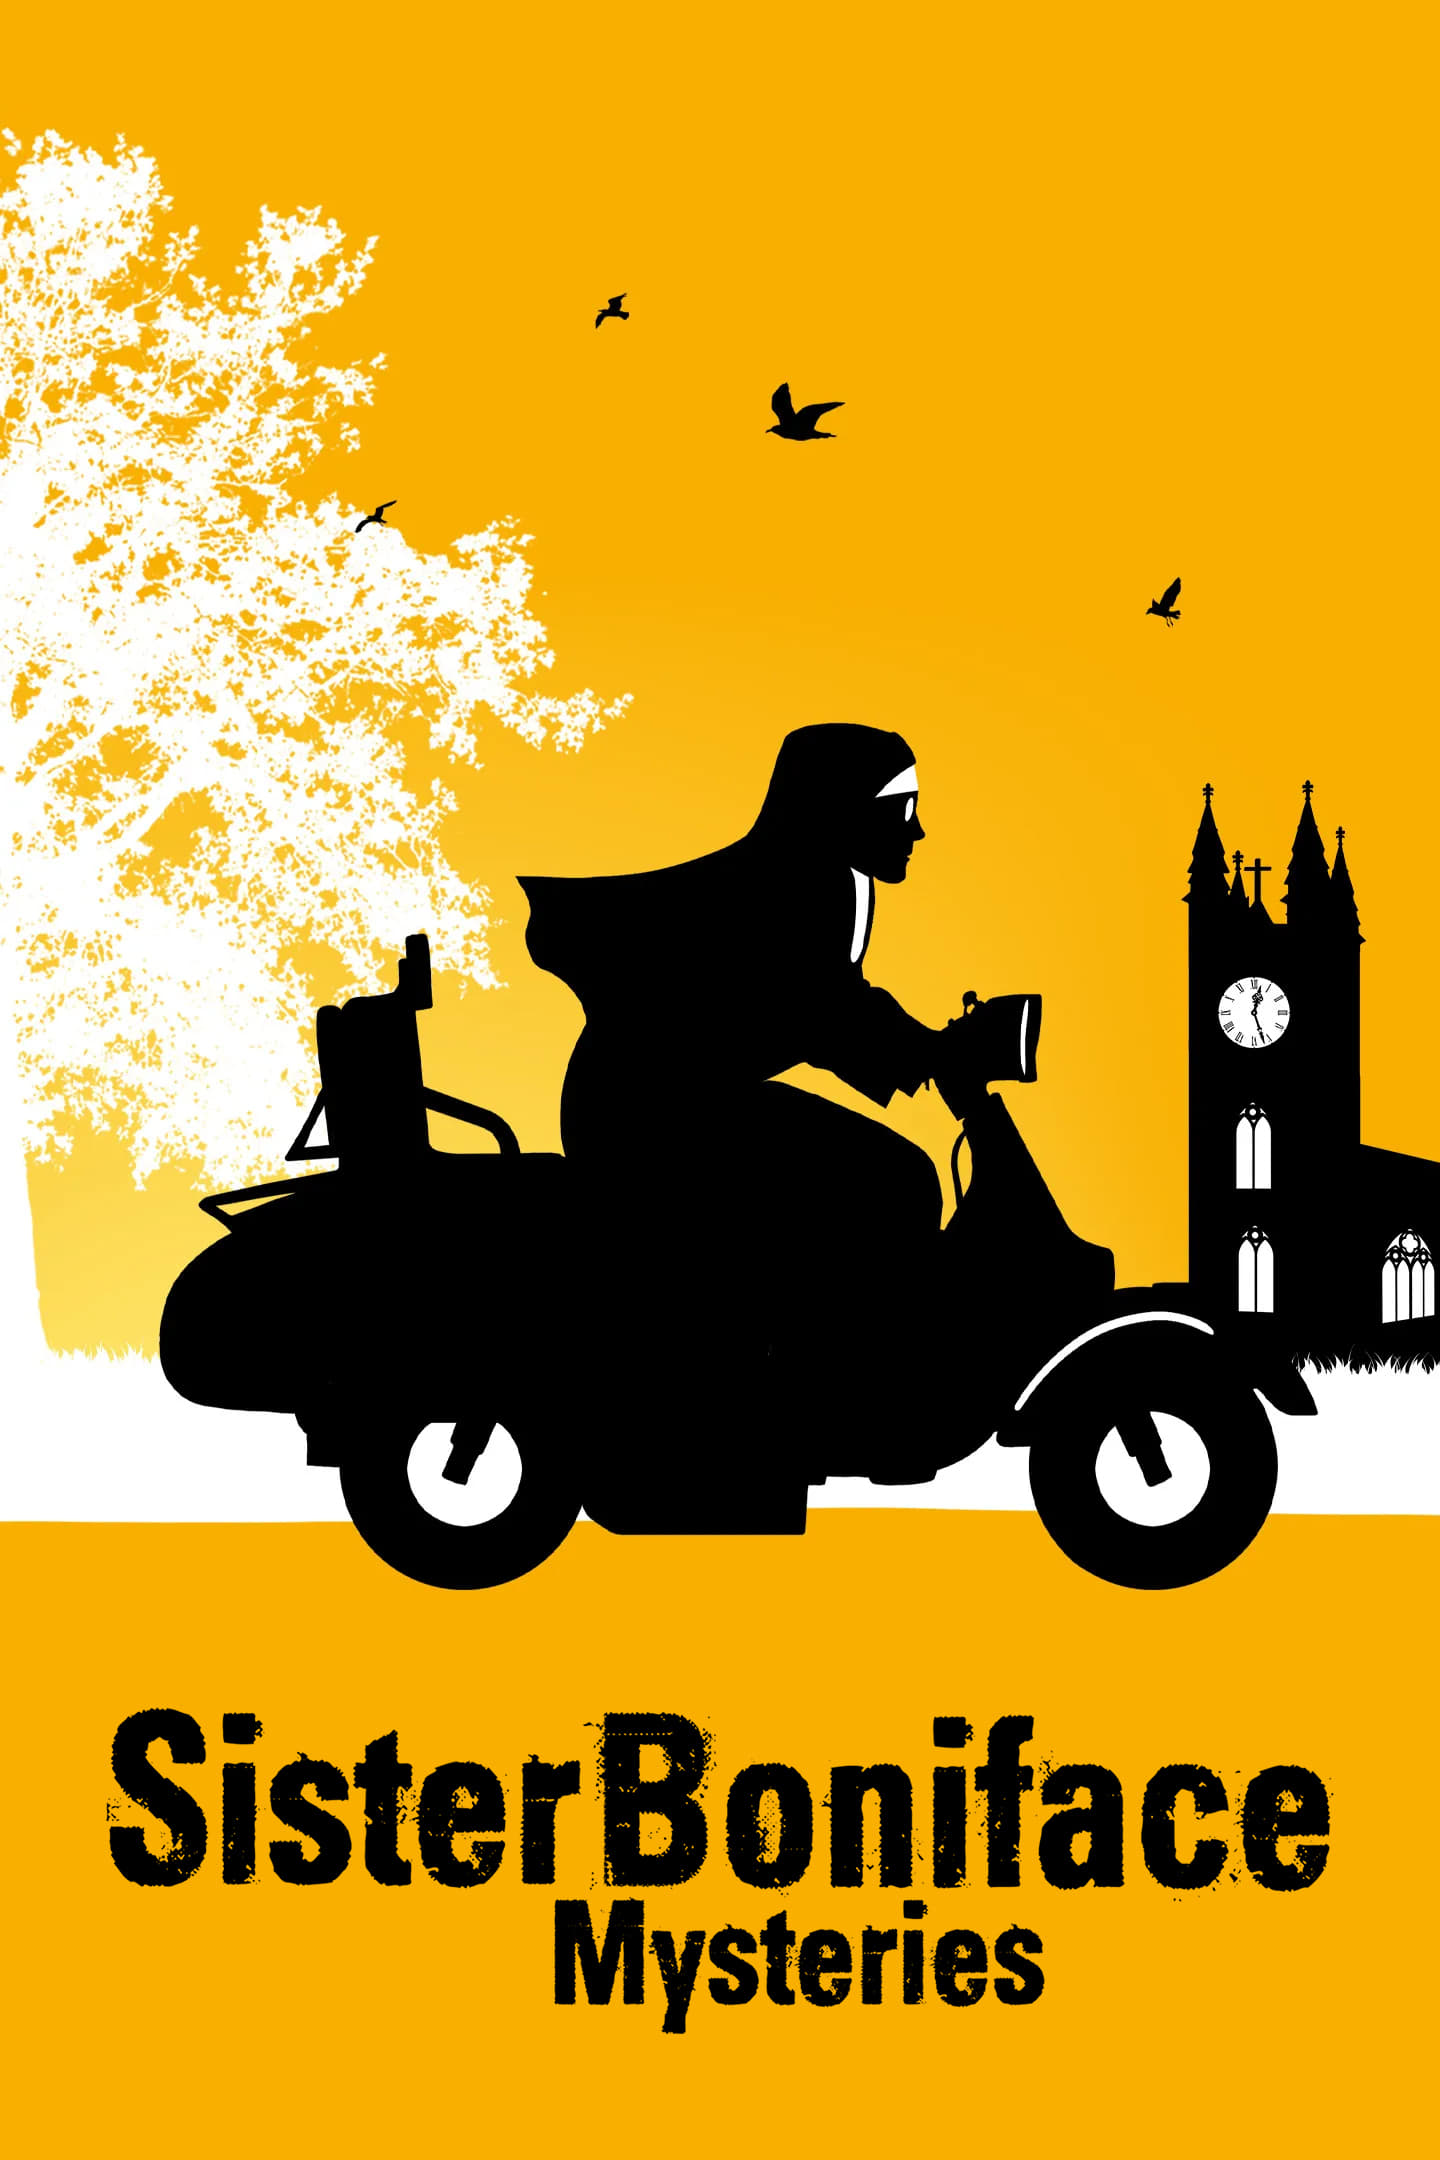 Sister Boniface Mysteries TV Shows About 1960s